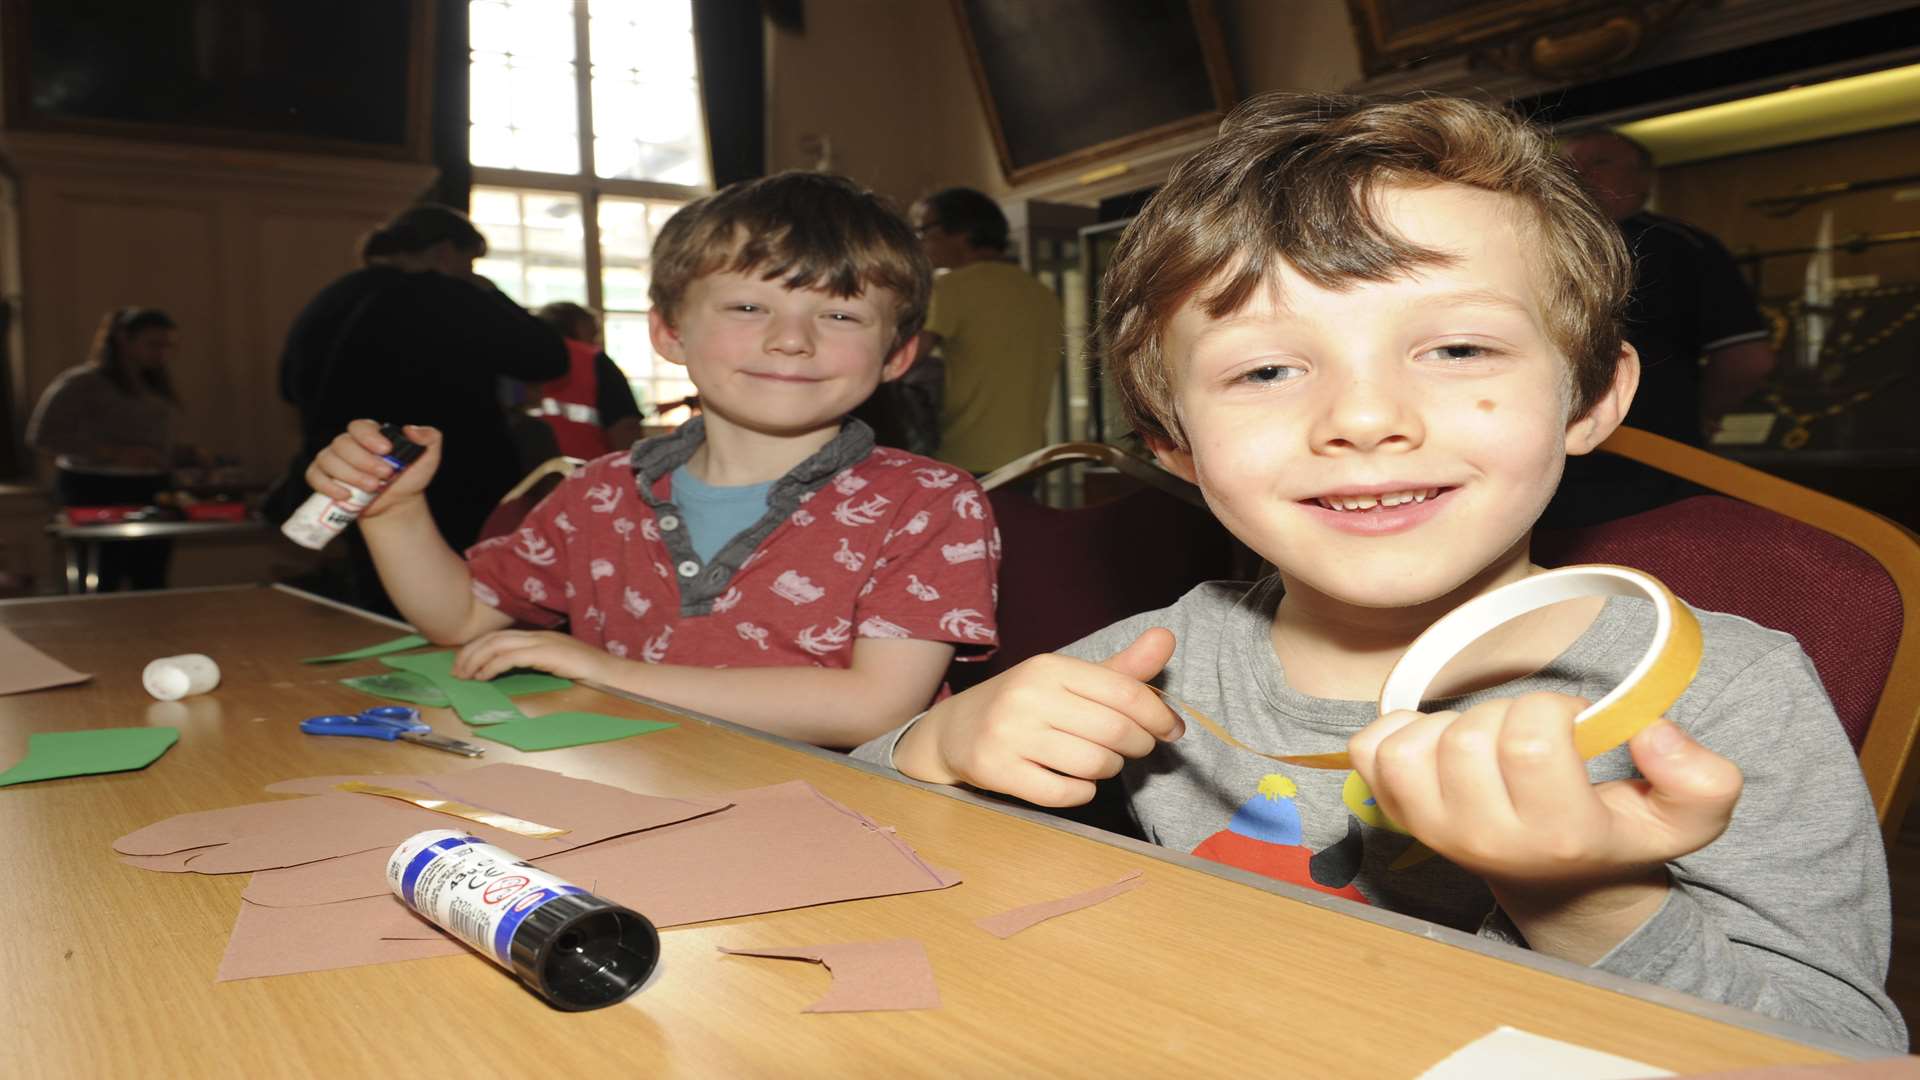 Twins, Marlowe and Huxley Hill, aged, five, get creative at a cave chic arts and crafts workshop at the Guildhall Museum